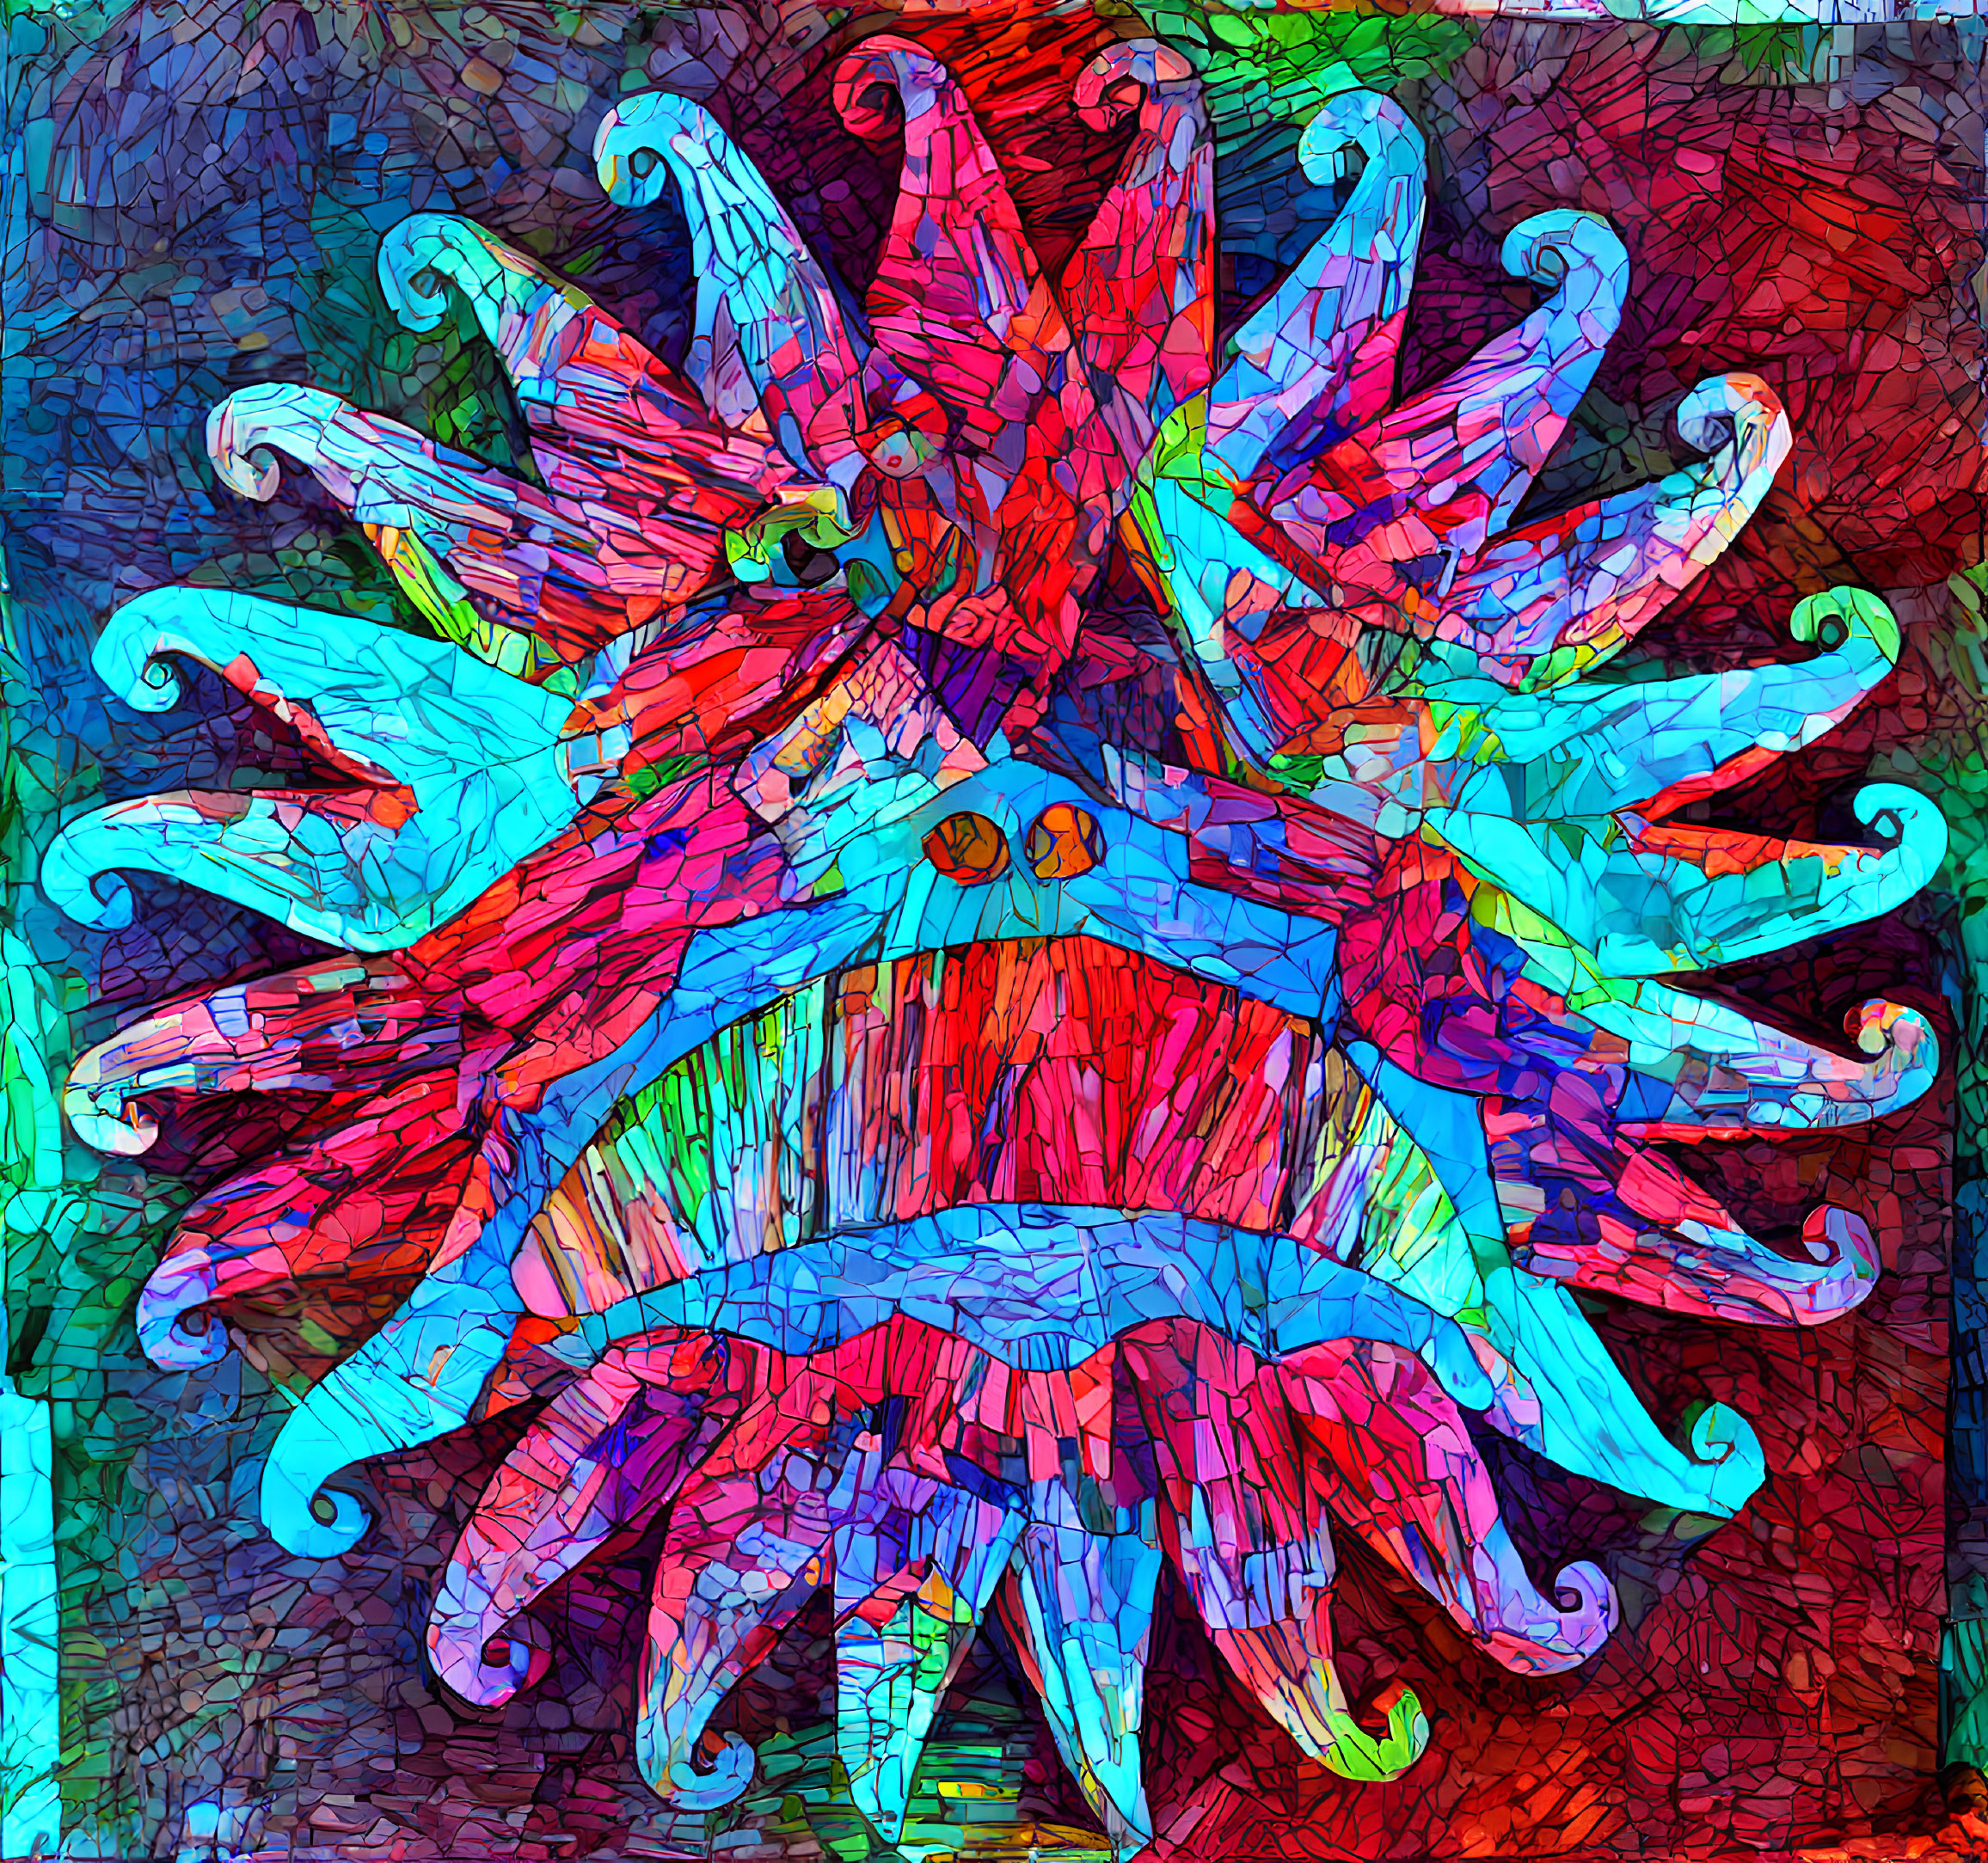 Colorful Abstract Octopus-Like Entity on Textured Background